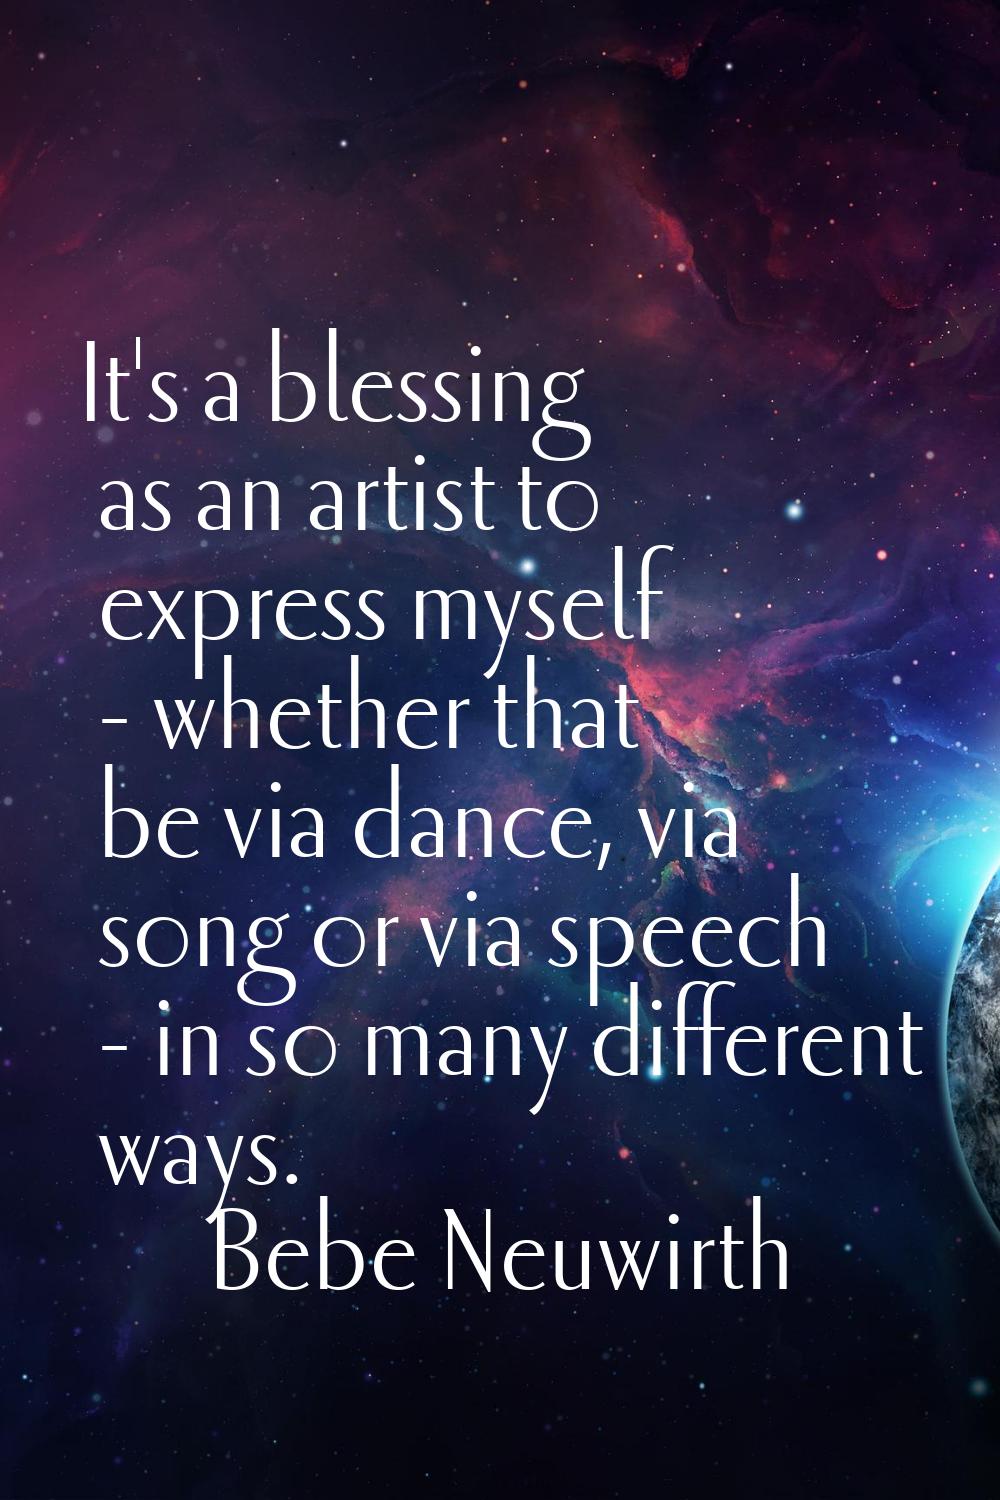 It's a blessing as an artist to express myself - whether that be via dance, via song or via speech 